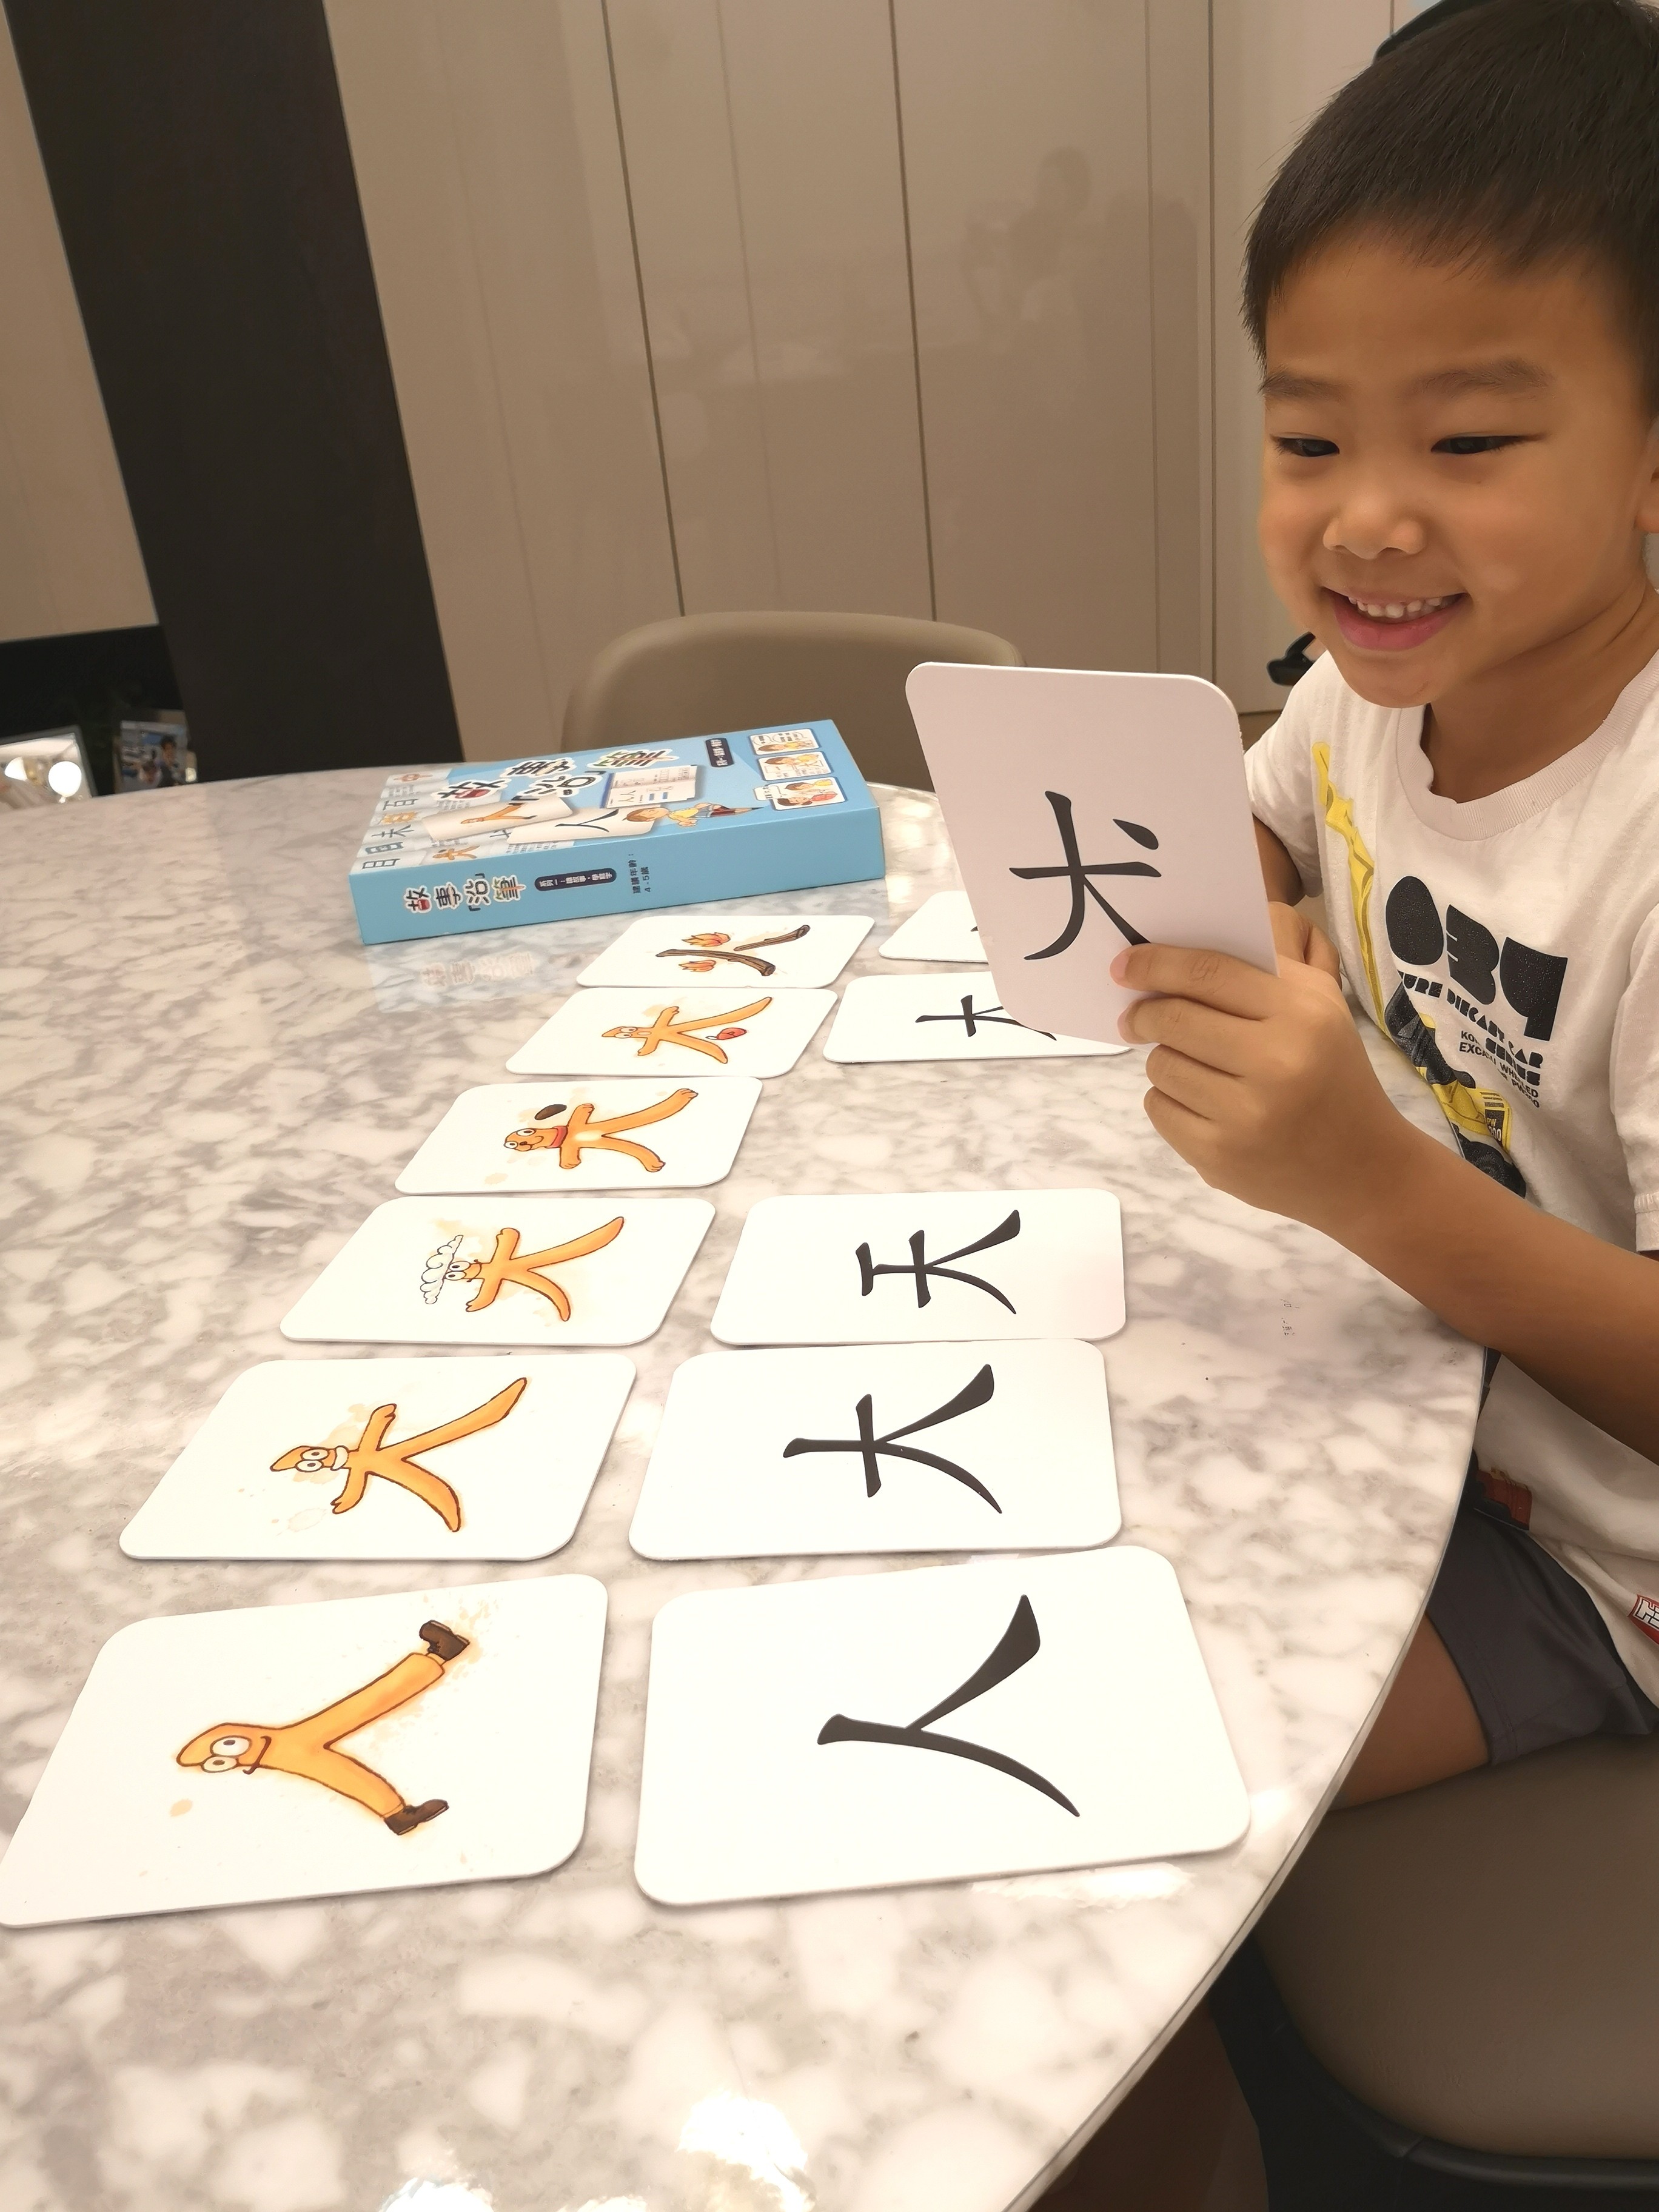 No matter what stage of Mandarin learning your child is at, remember that our job as parents is to show our support and appreciation of their progress. Photo: Anita Shum